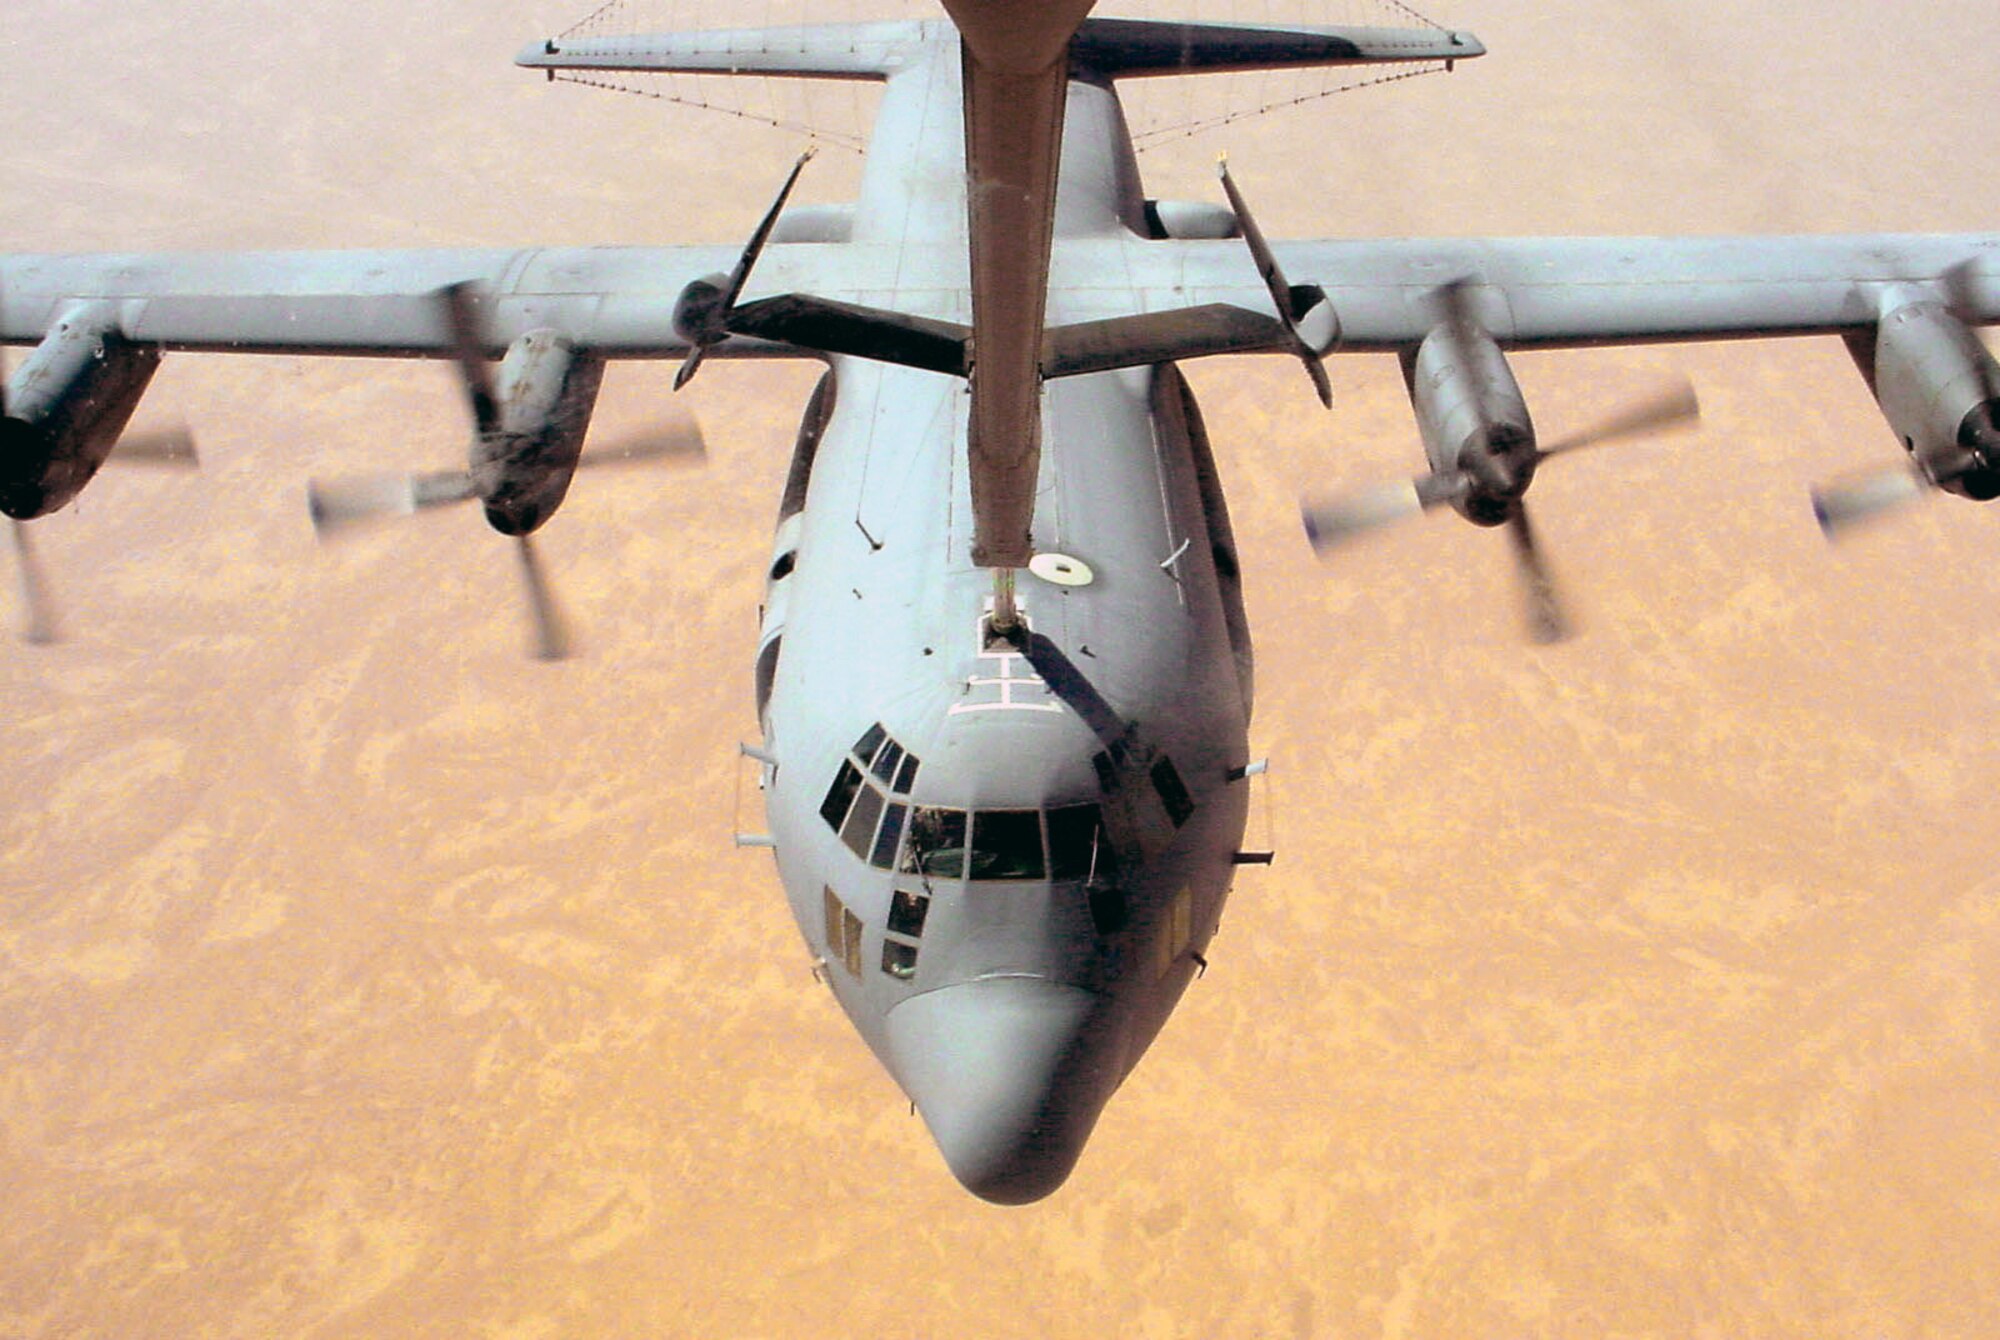 OPERATION IRAQI FREEDOM (AFPN) -- An EC-130H Compass Call aircraft from the 41st Expeditionary Electronic Combat Squadron refuels while flying a mission over Iraq during Operation Iraqi Freedom.  Squadron airmen will return home soon to Davis-Monthan Air Force Base, Ariz.  (U.S Air Force photo by Master Sgt. Luis Drummond)